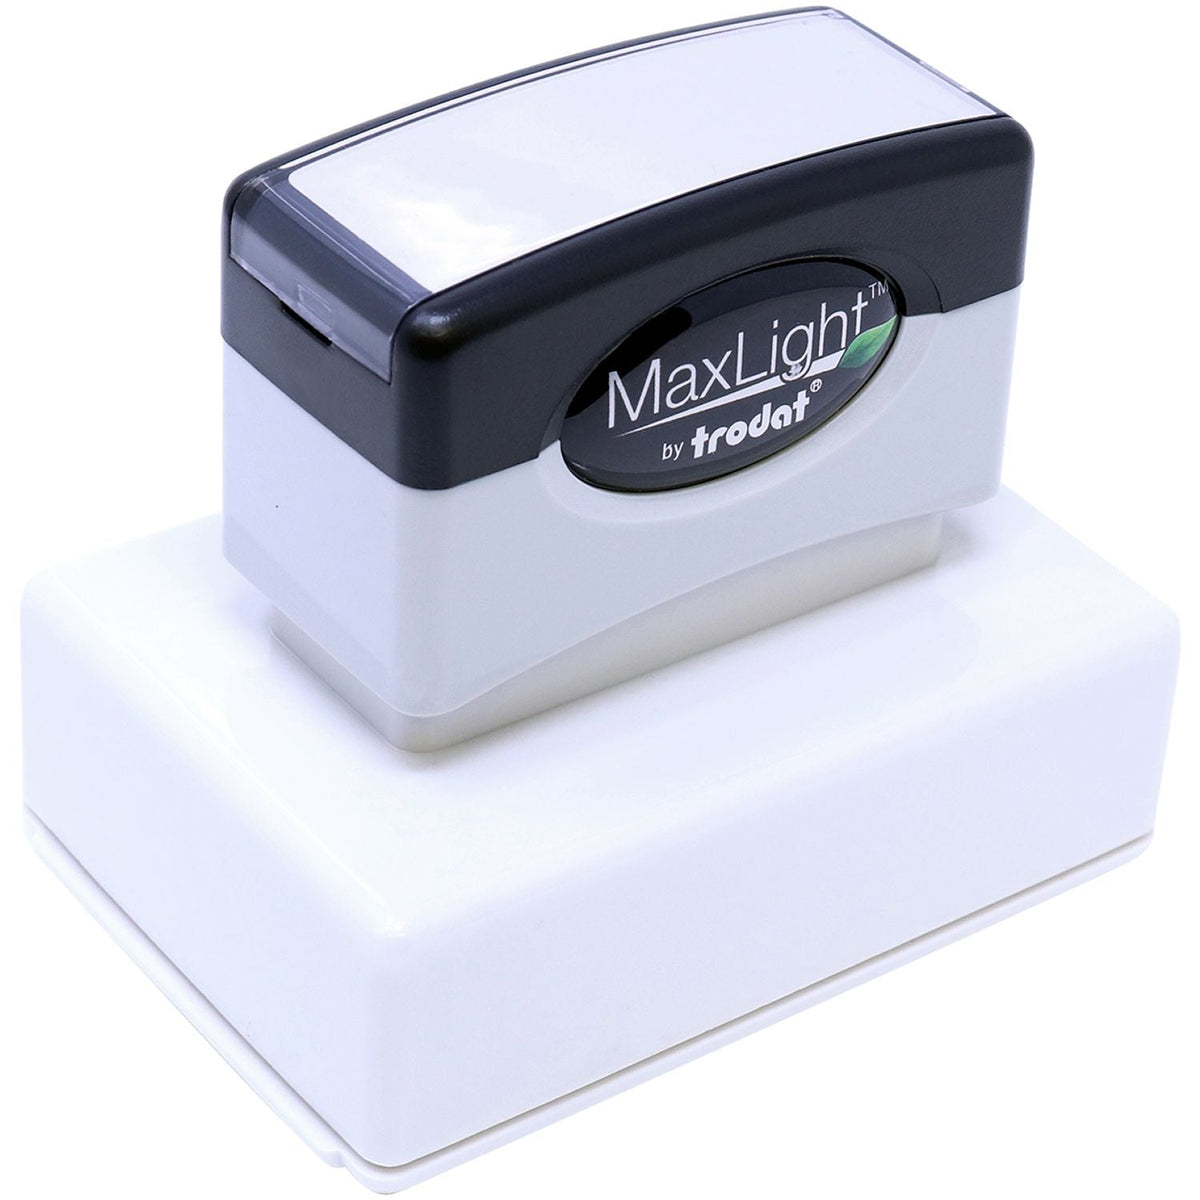 Maxlight Pre Inked Stamp Xl2 165 Top Front Angle